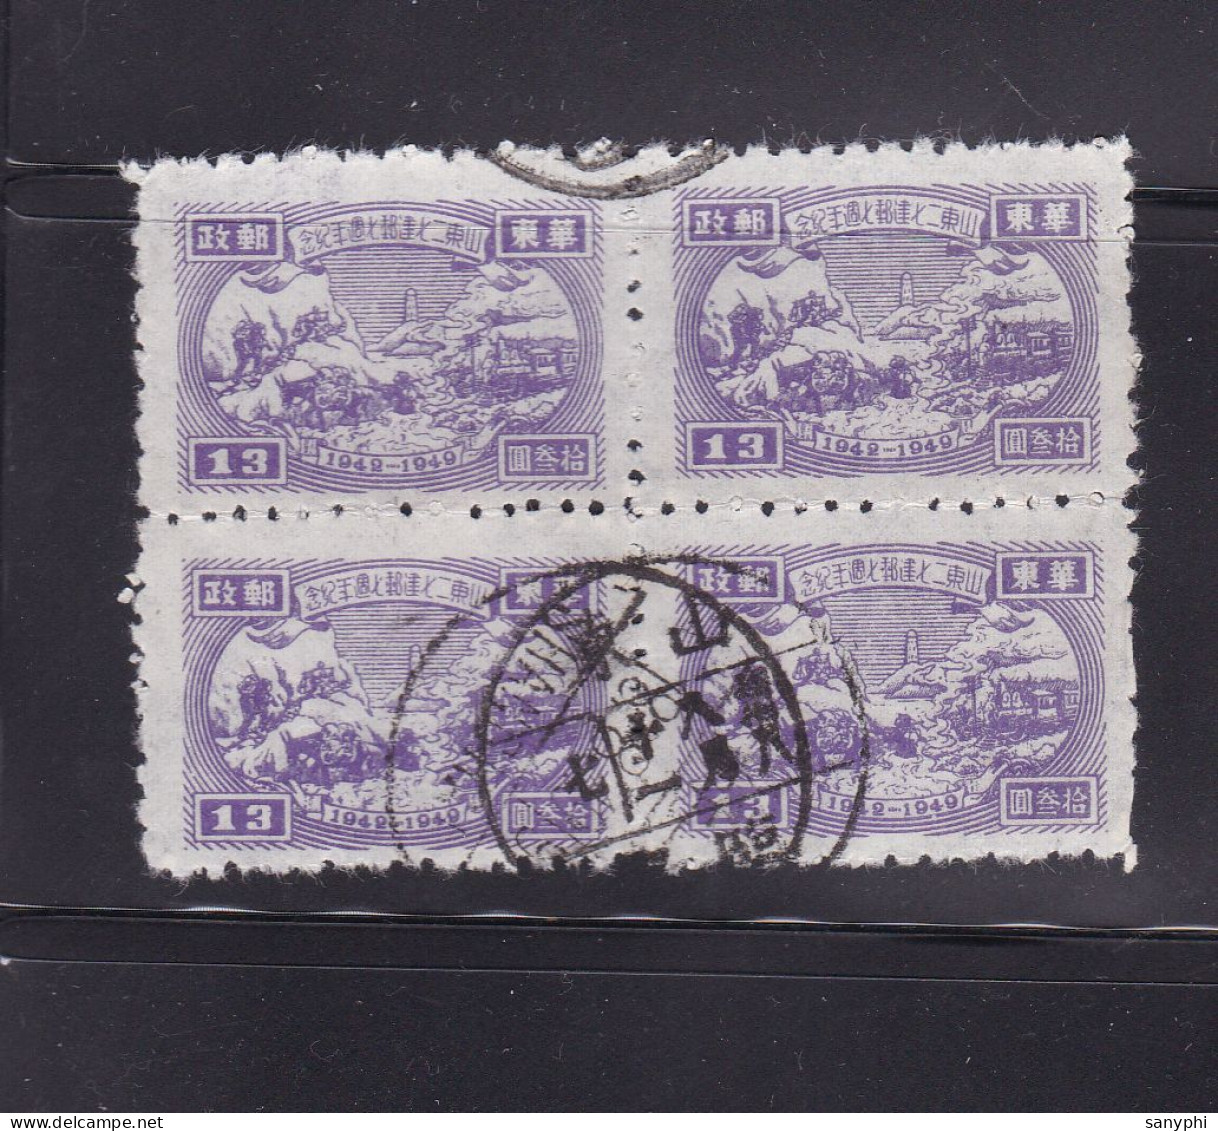 1949 East Cina China Chine SgEC327 4 Used Stamps Cxl By Shangdong  - Unused Stamps